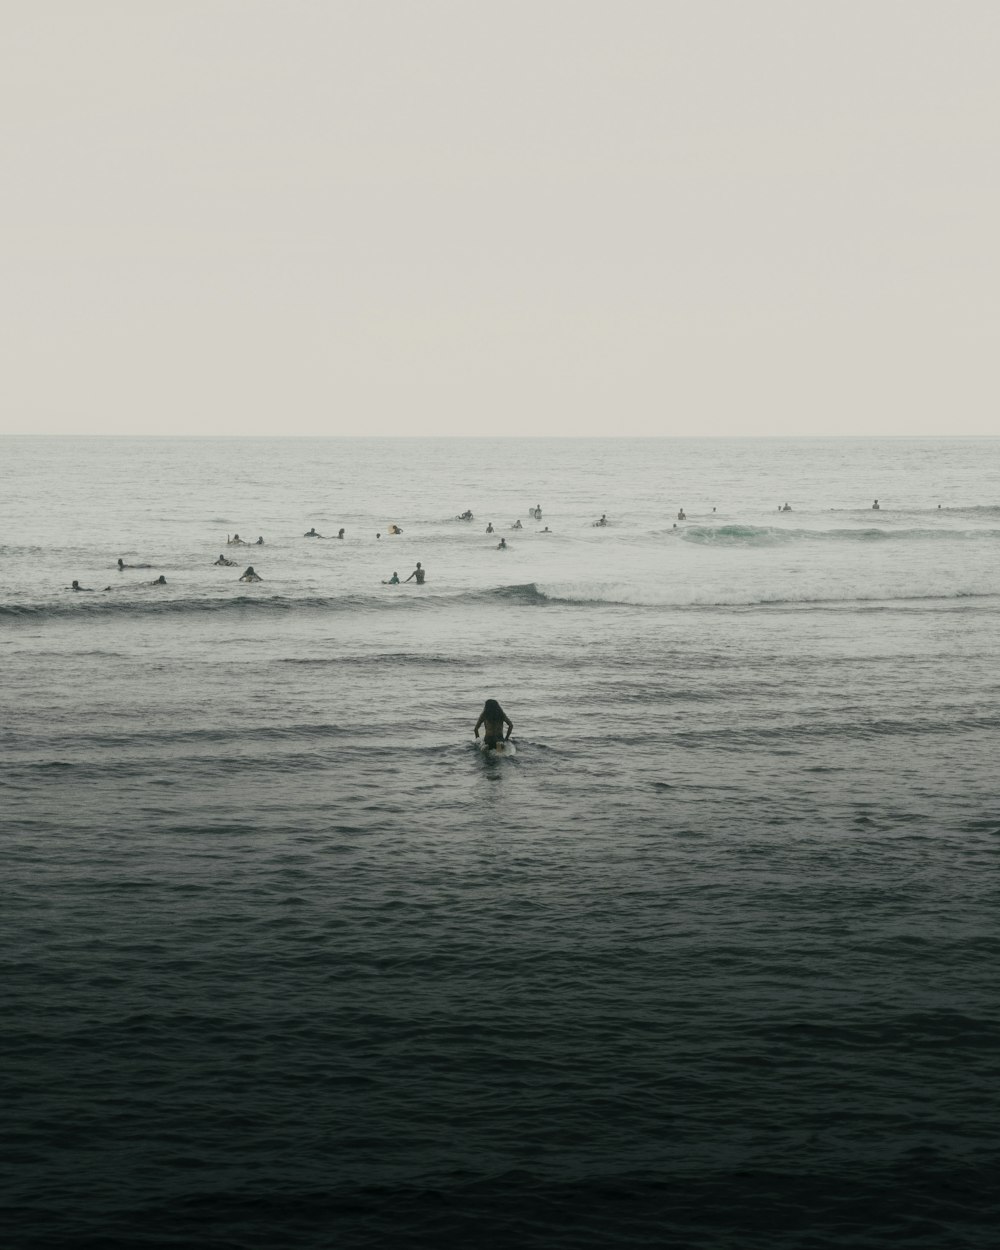 a group of people in the ocean with surfboards